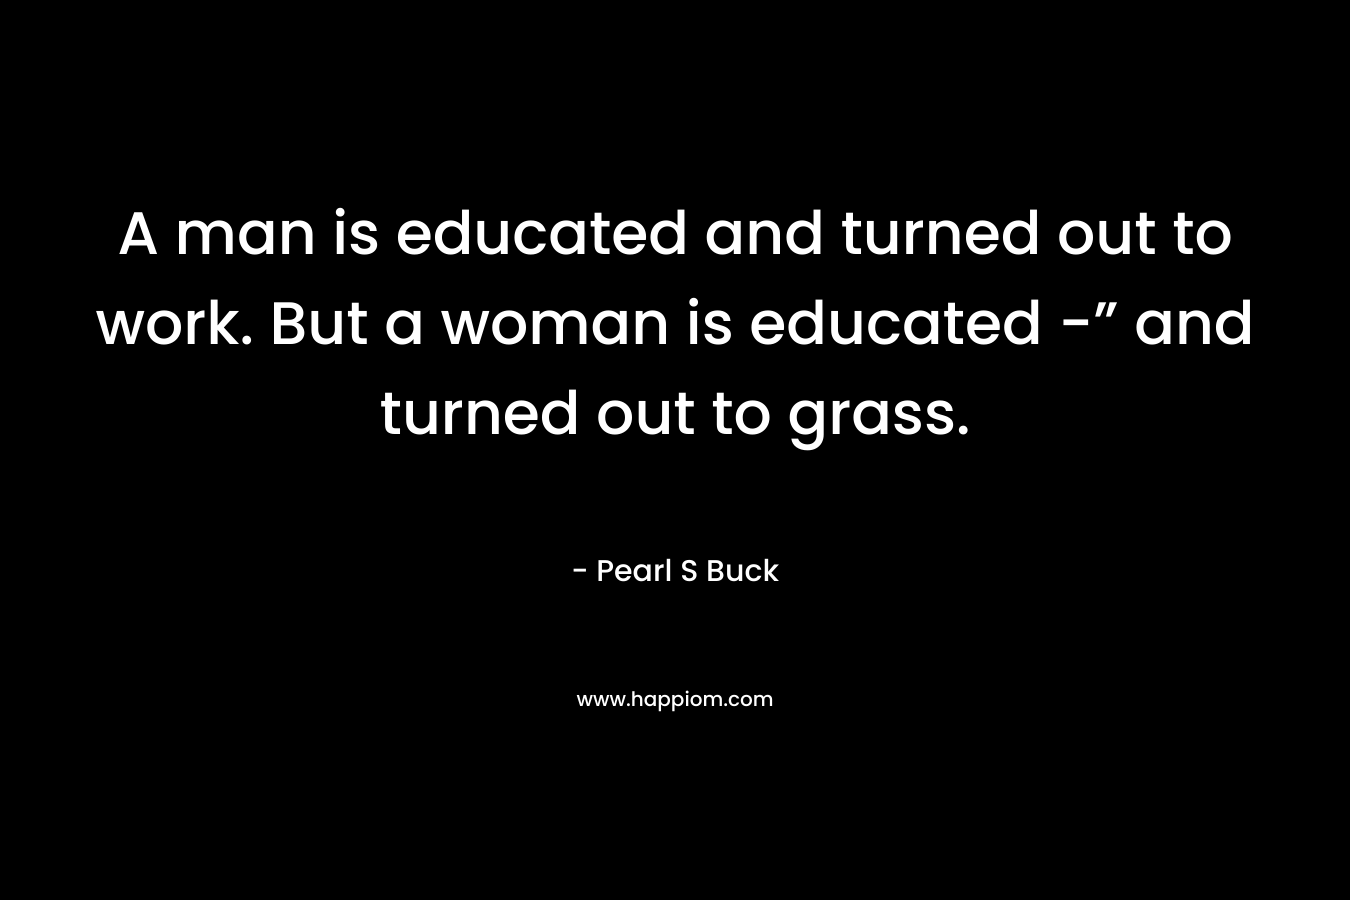 A man is educated and turned out to work. But a woman is educated -” and turned out to grass. – Pearl S Buck